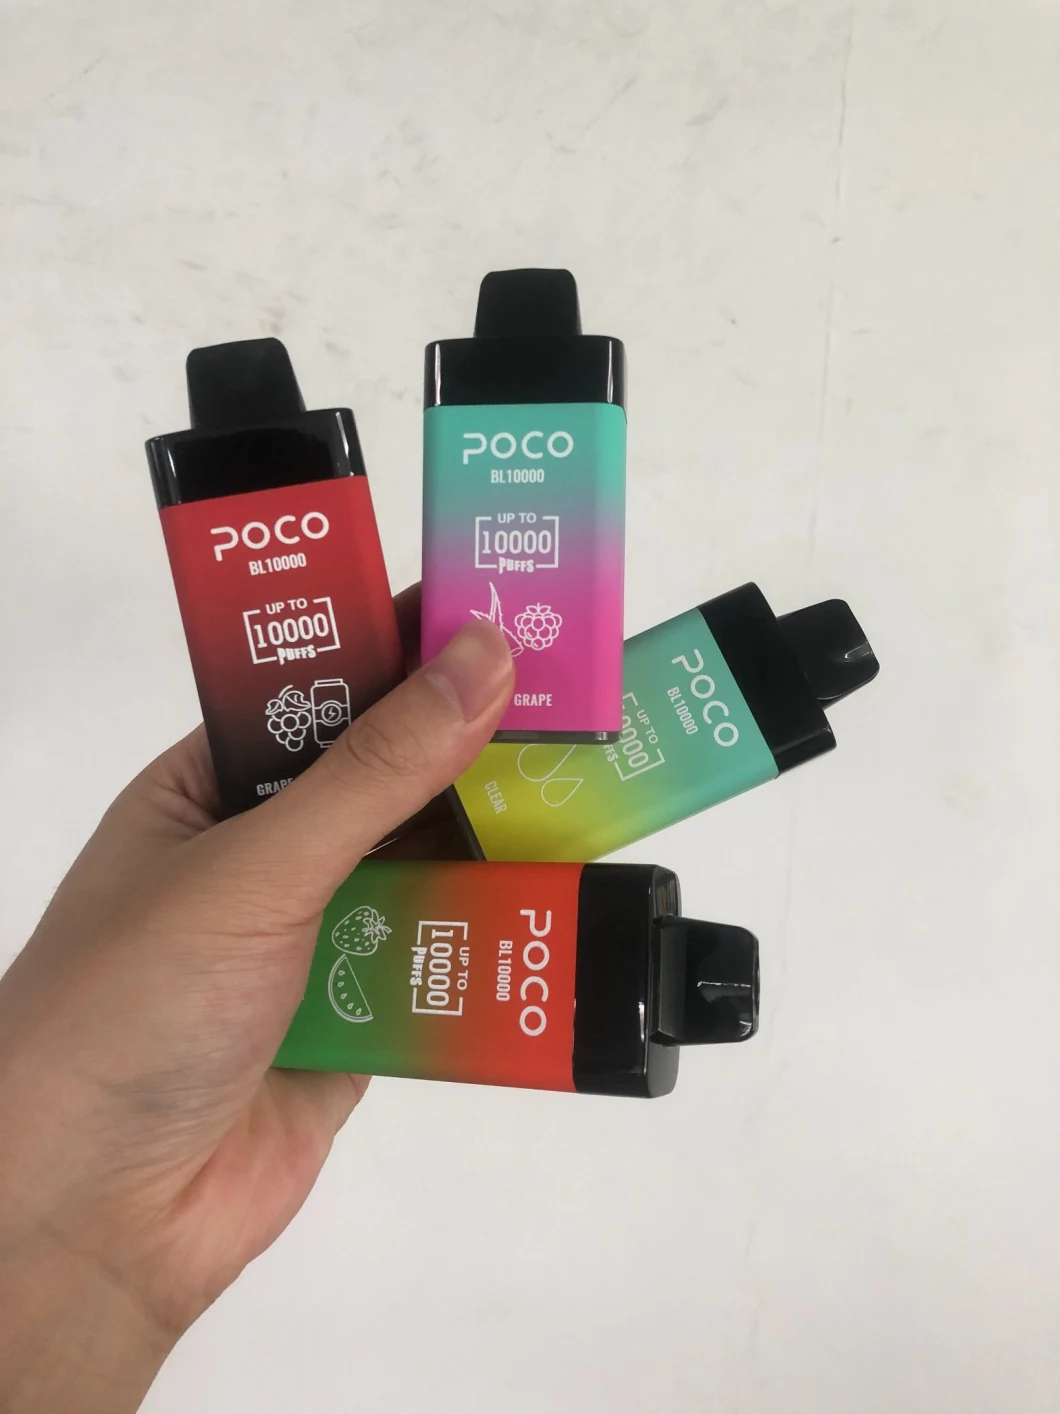 The Best Poco Bl10000 with Wholesale Price OEM/ODM Available Vaporizor Fruit Flavor Taste 10000puffs Disposable Vape